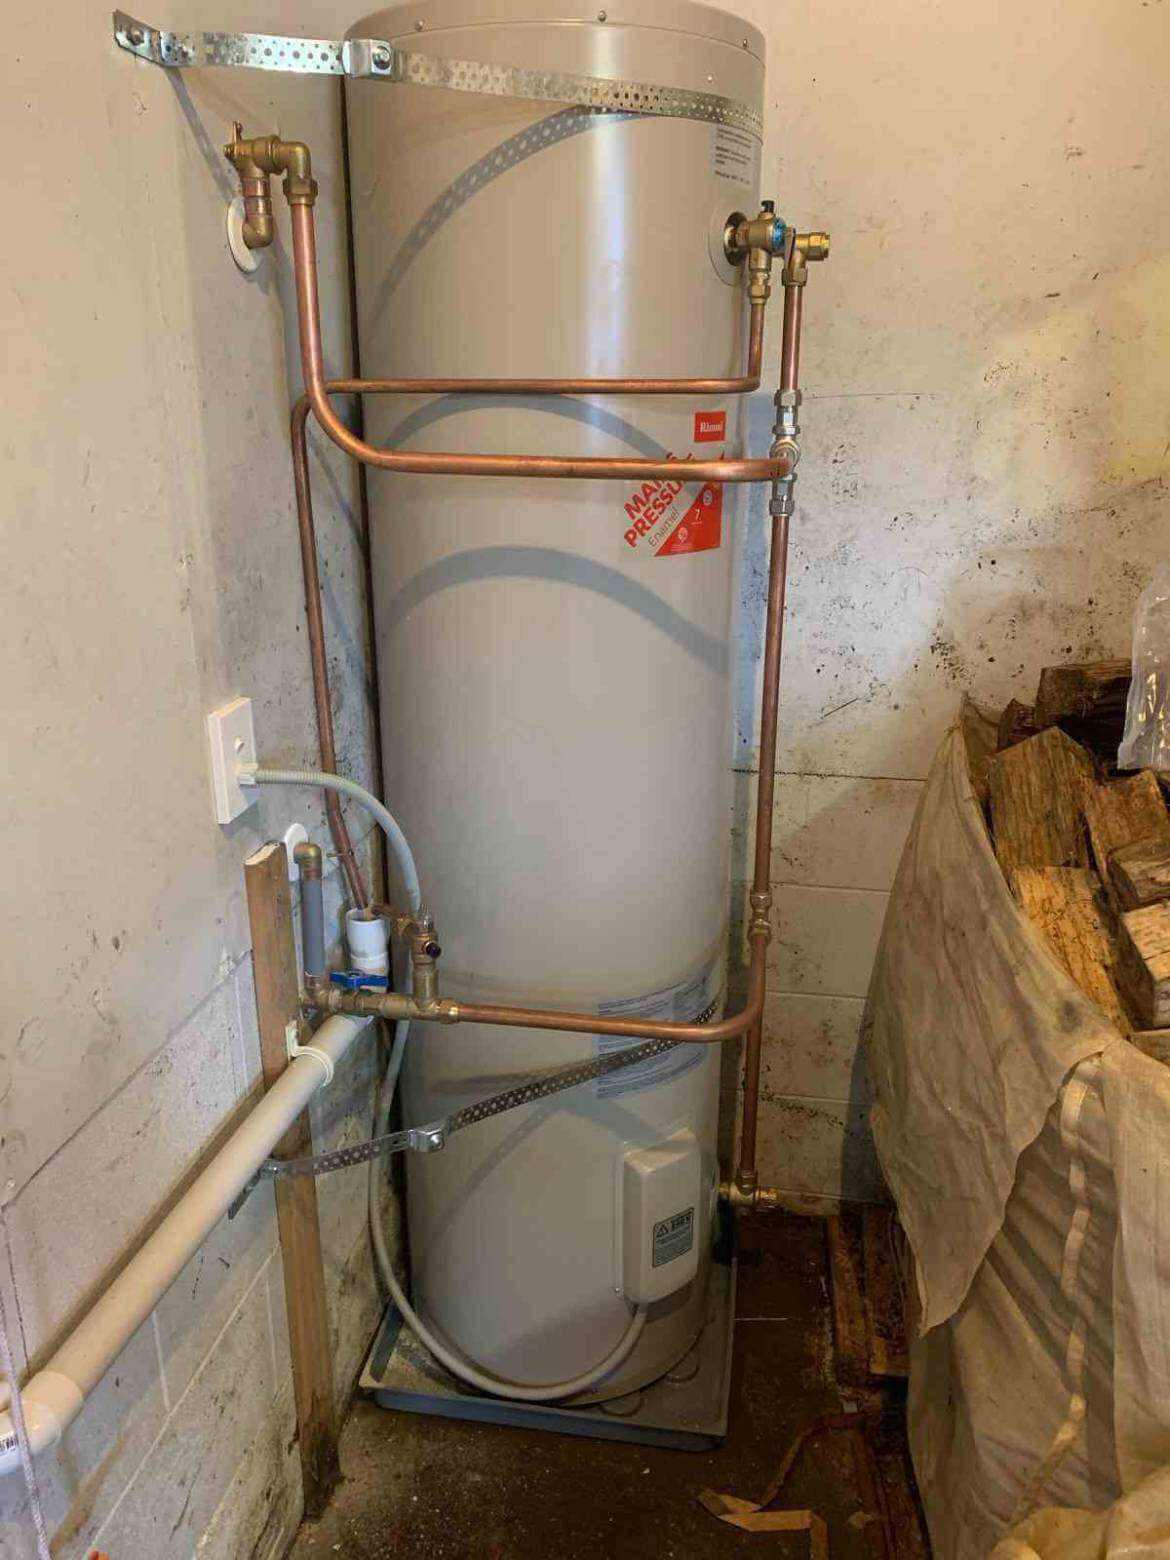 How Much Does It Cost To Install A Hot Water Cylinder